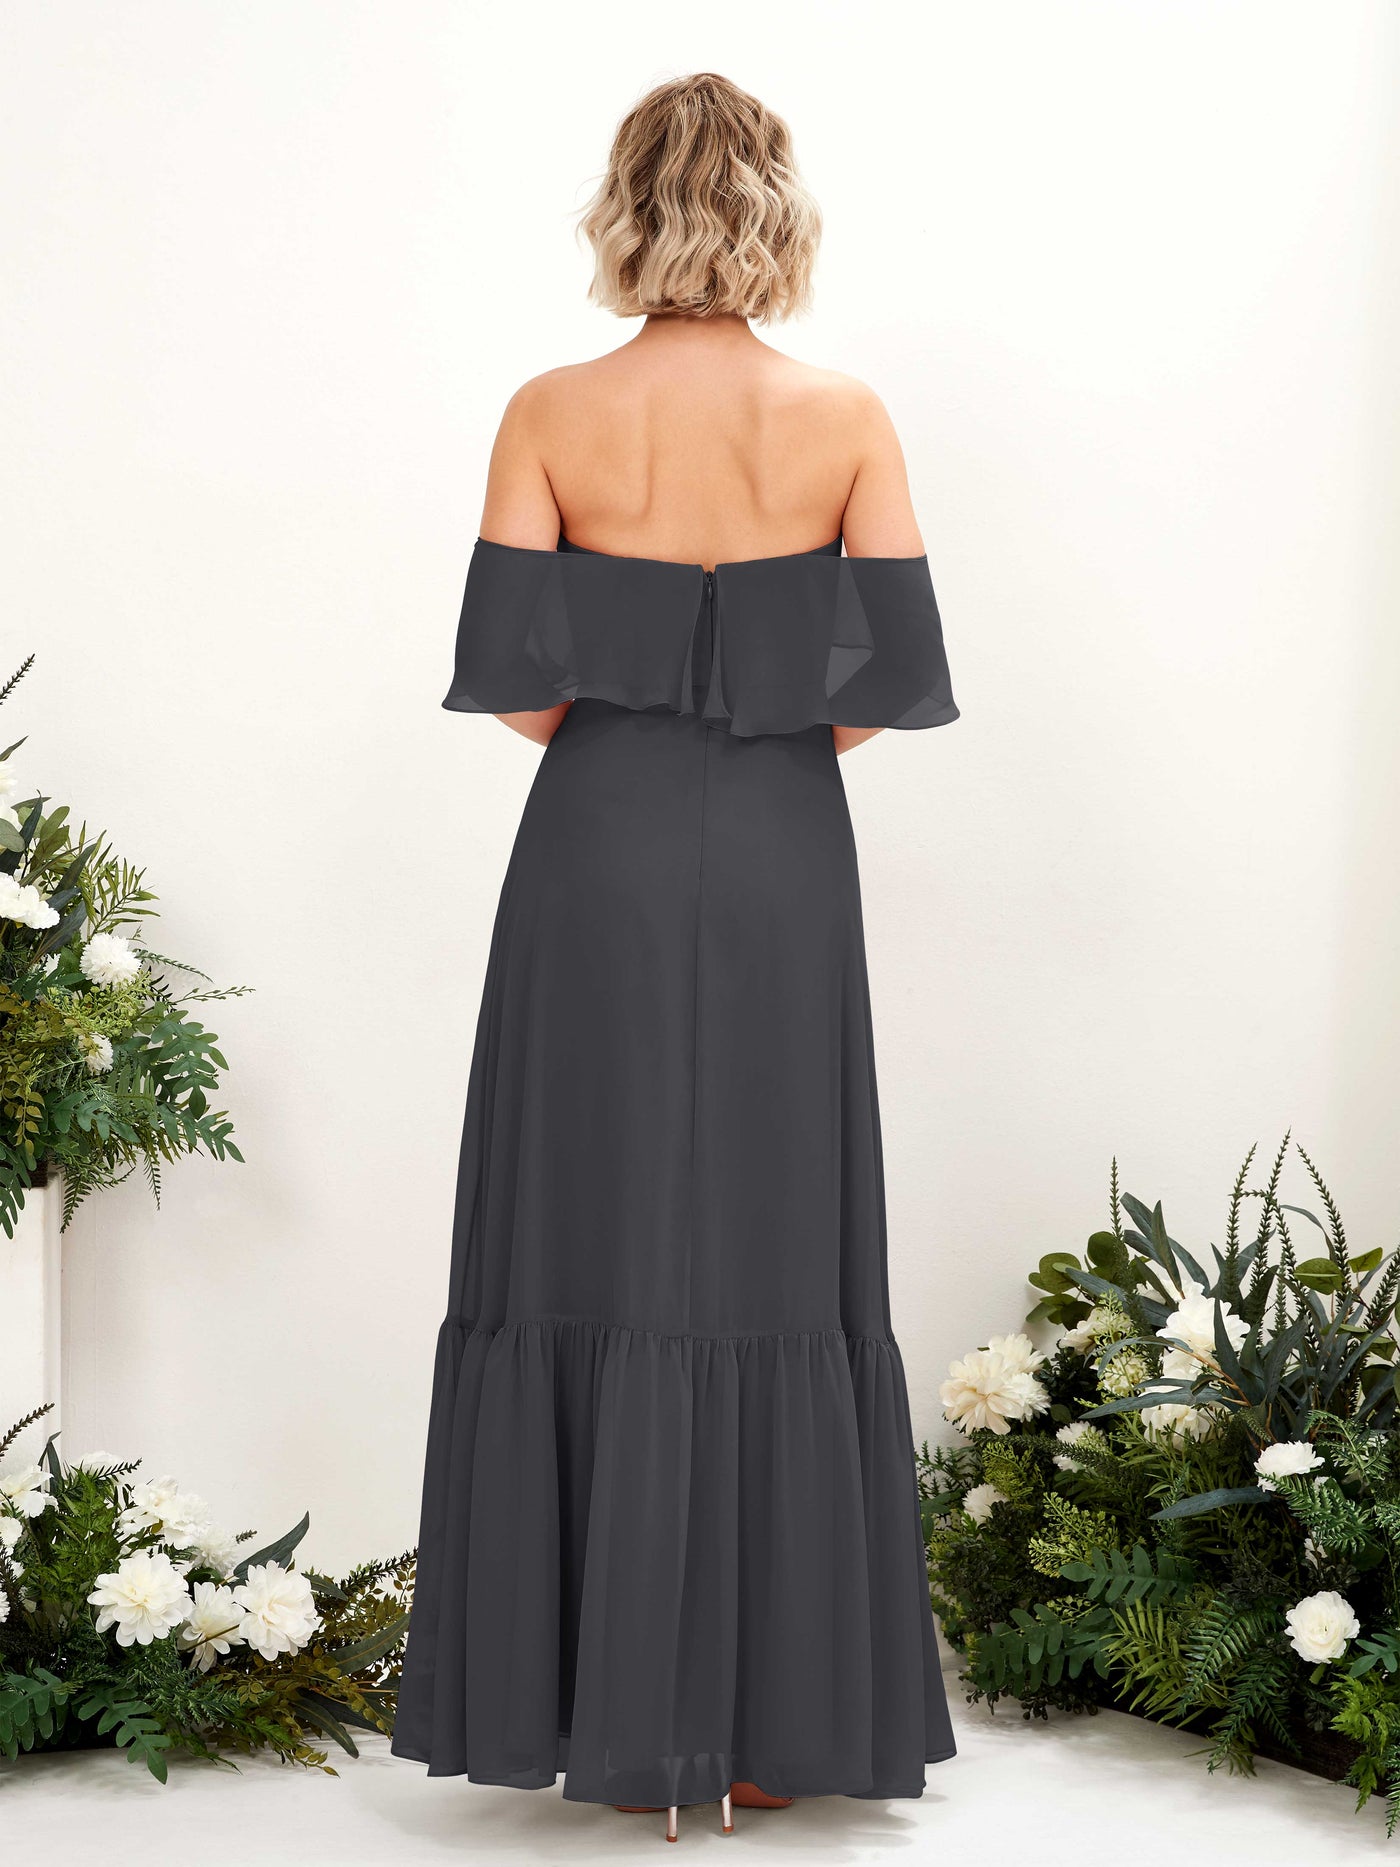 Pewter Bridesmaid Dresses Bridesmaid Dress A-line Chiffon Off Shoulder Full Length Sleeveless Wedding Party Dress (81224538)#color_pewter